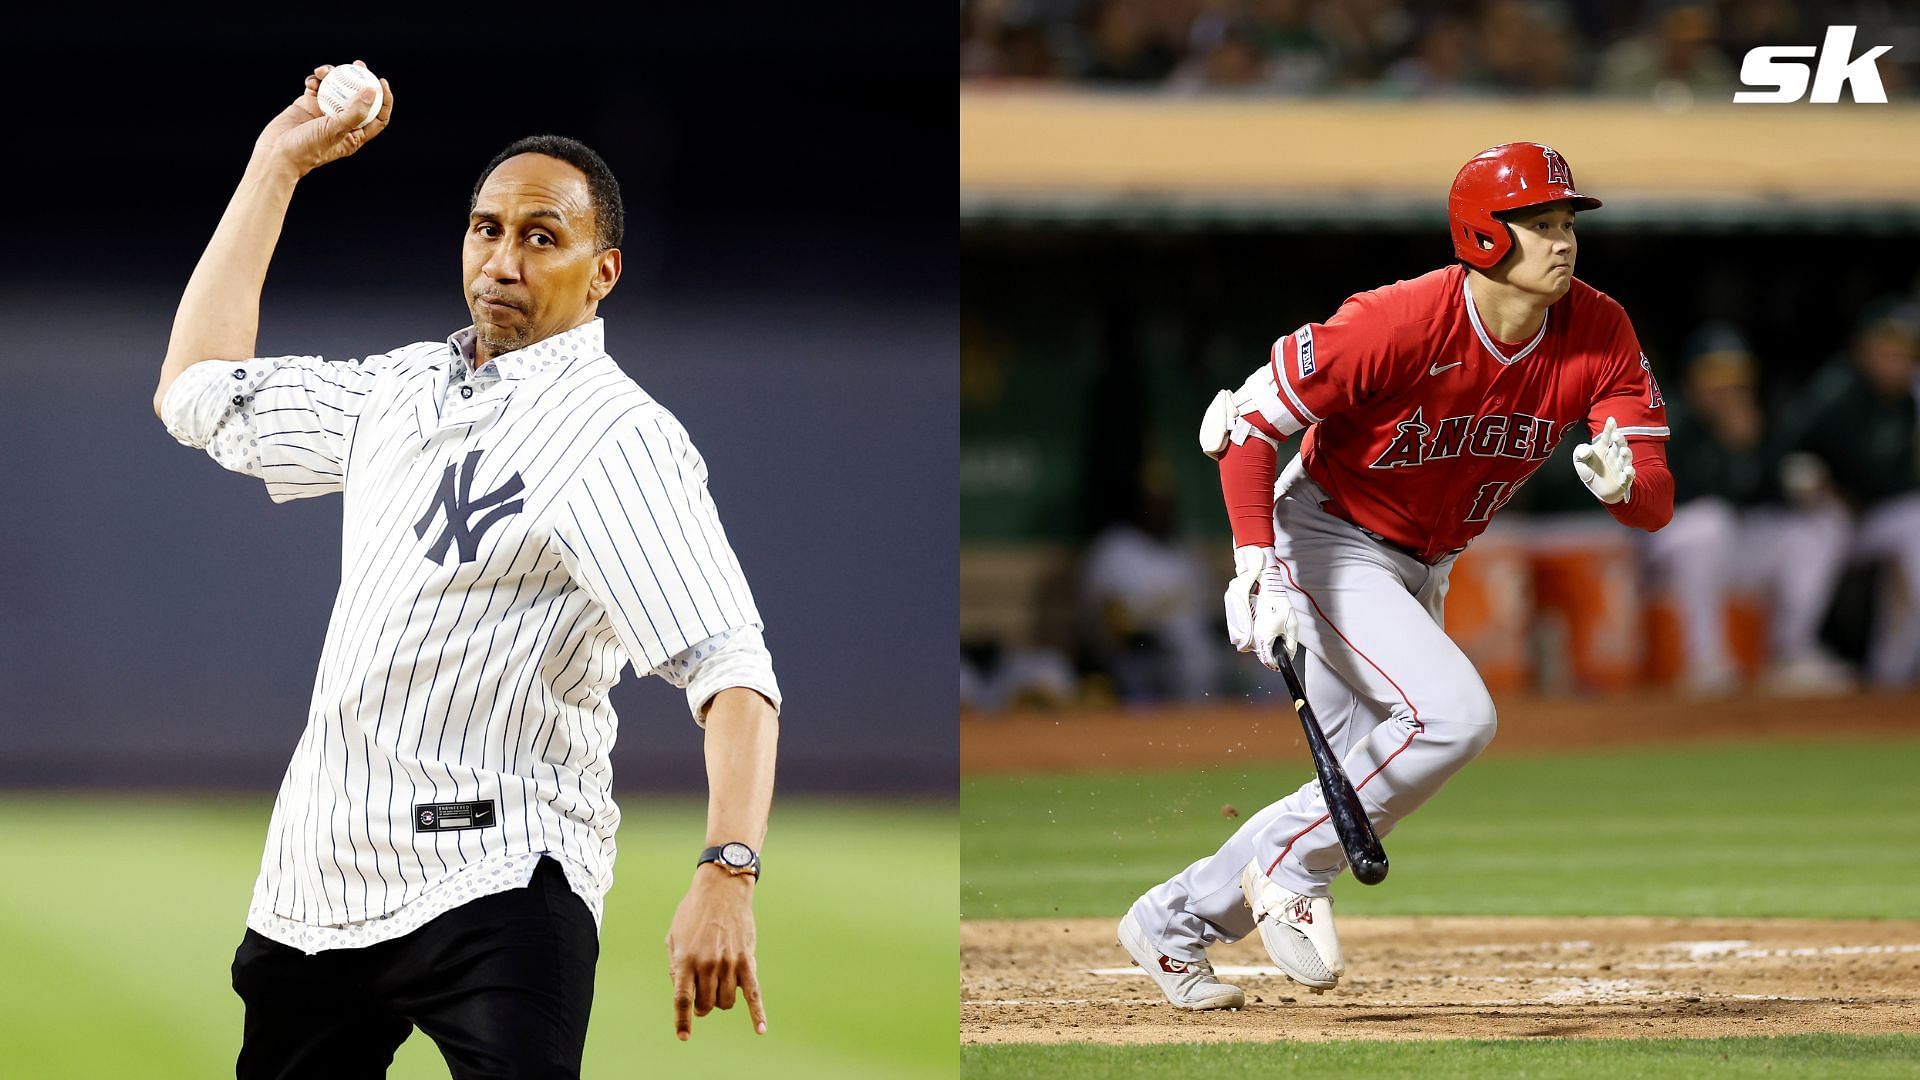 When Stephen A. Smith apologised to Shohei Ohtani and fans for making insensitive comments